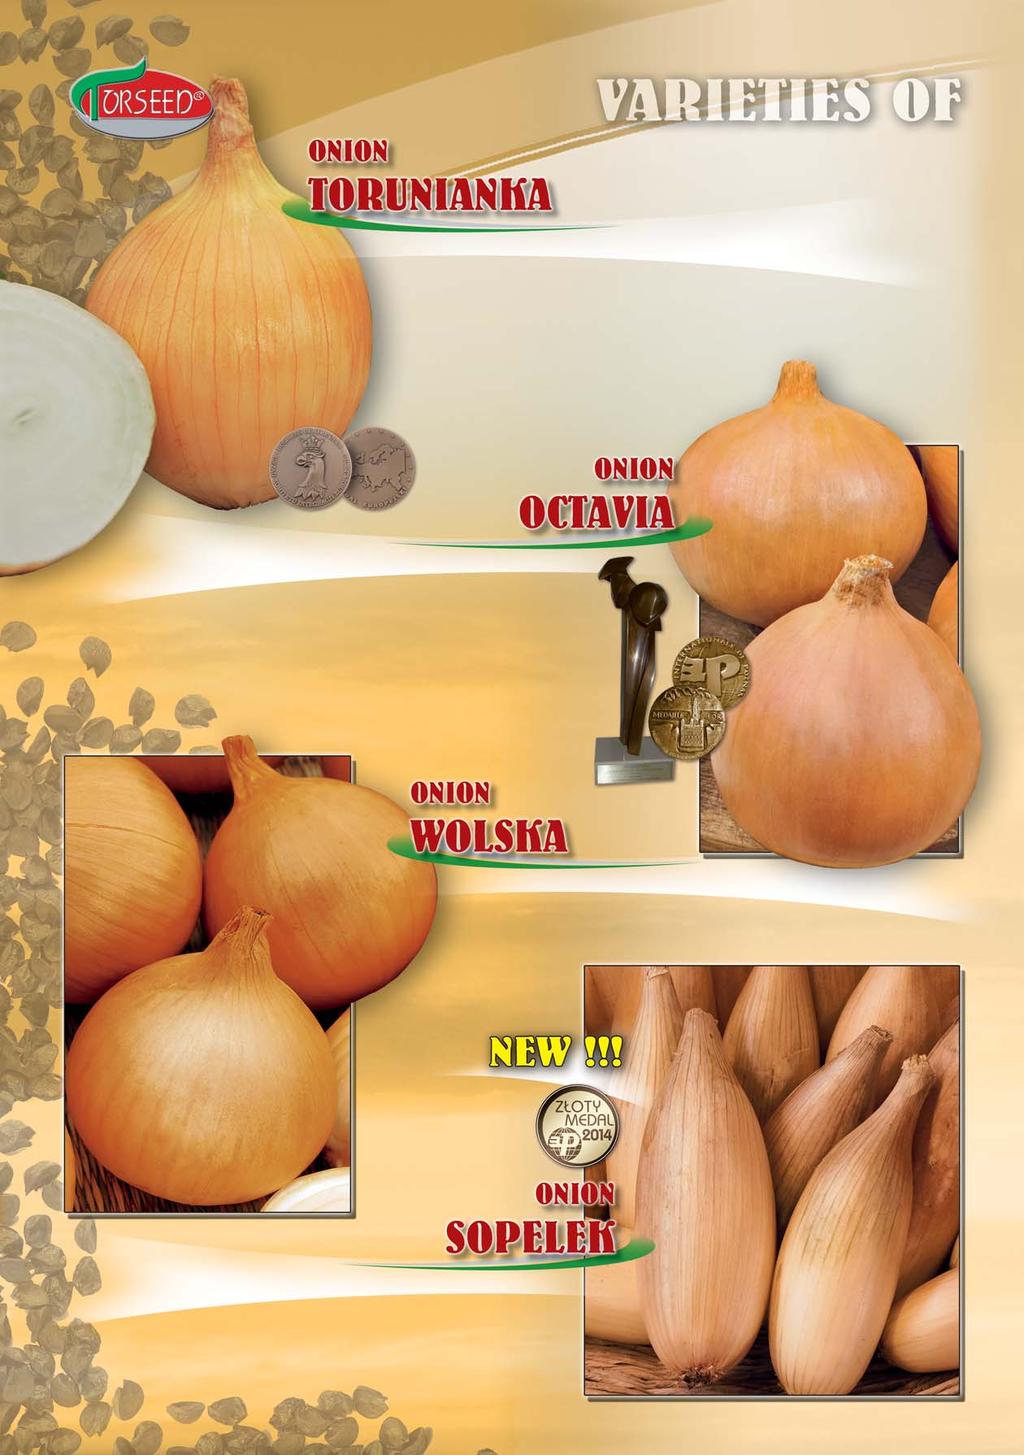 Medium-early variety for spring sowing cultivation. Yellow-brown scale, resistant to cracking. Average weight of onions: 150 g. Characteristic white-cream pulp.